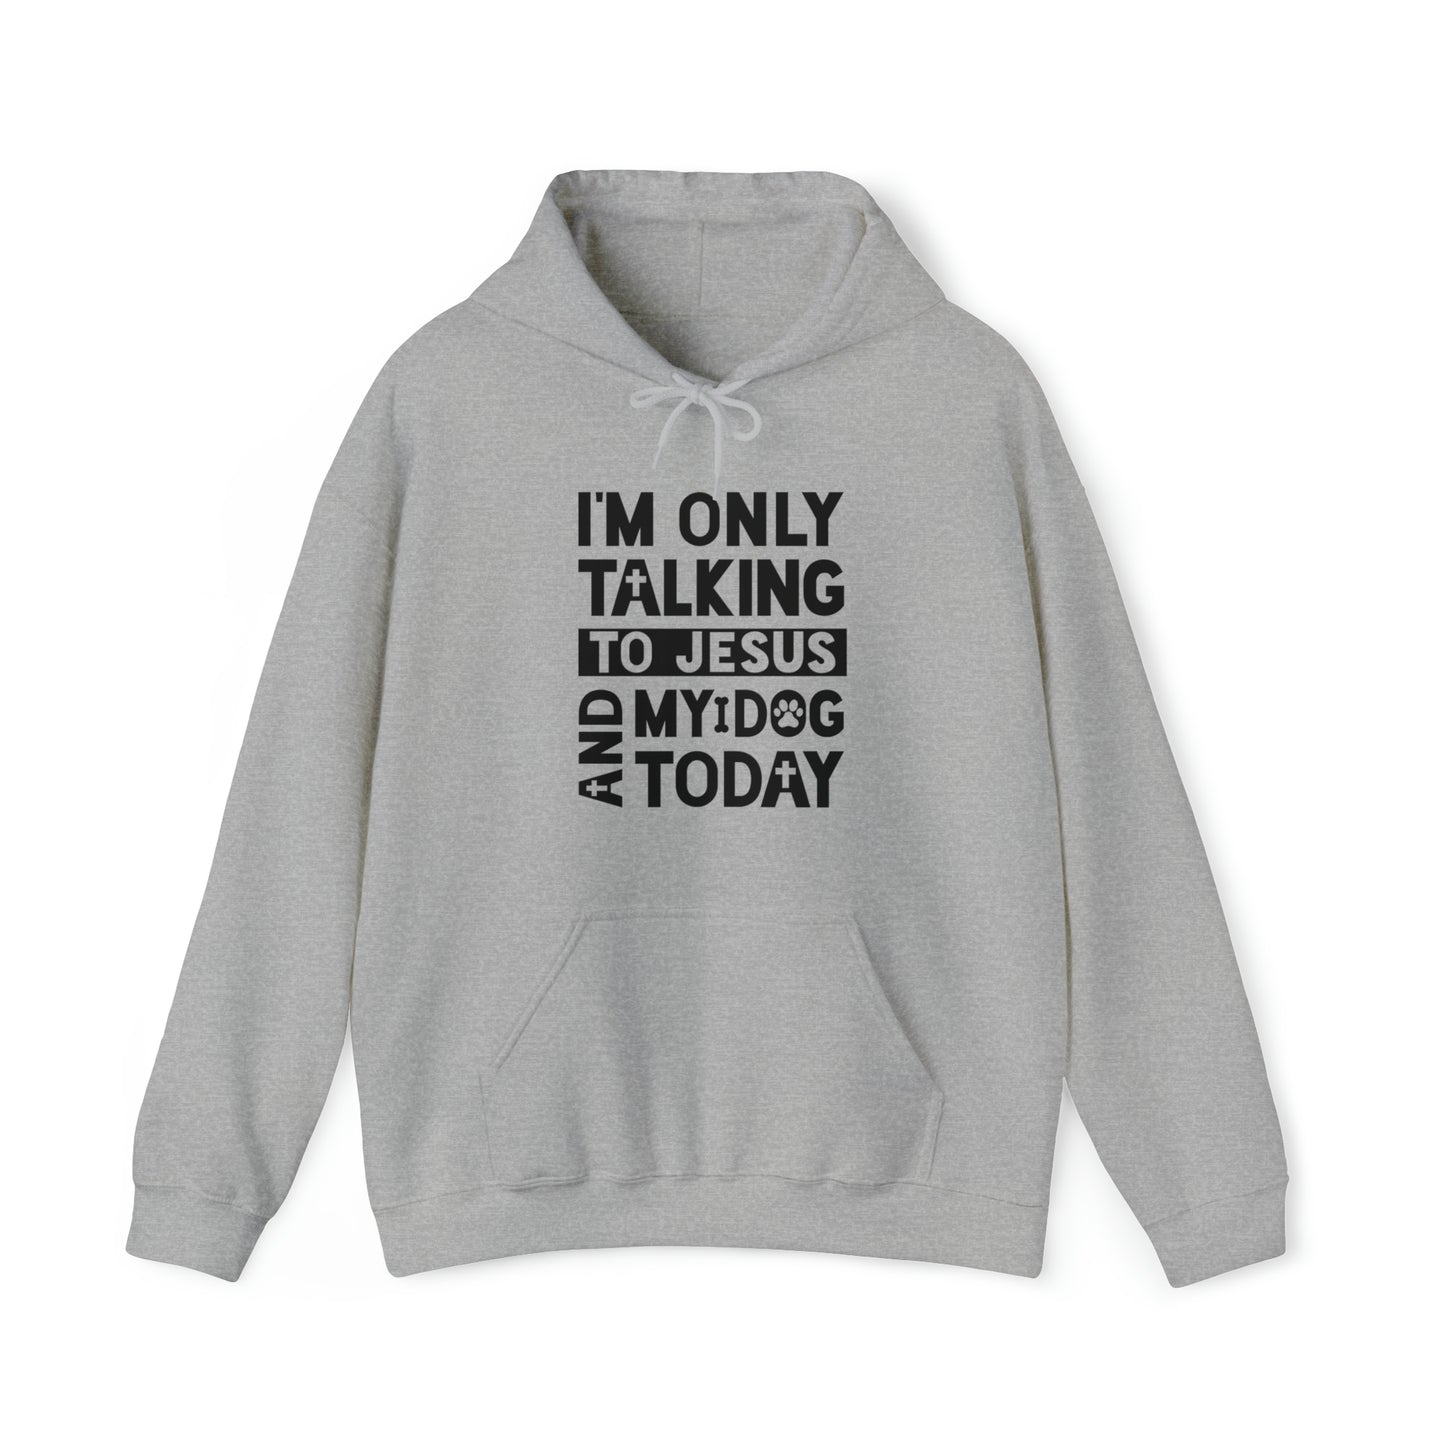 I'm Only Talking To Jesus And My Dog Today Hooded Sweatshirt